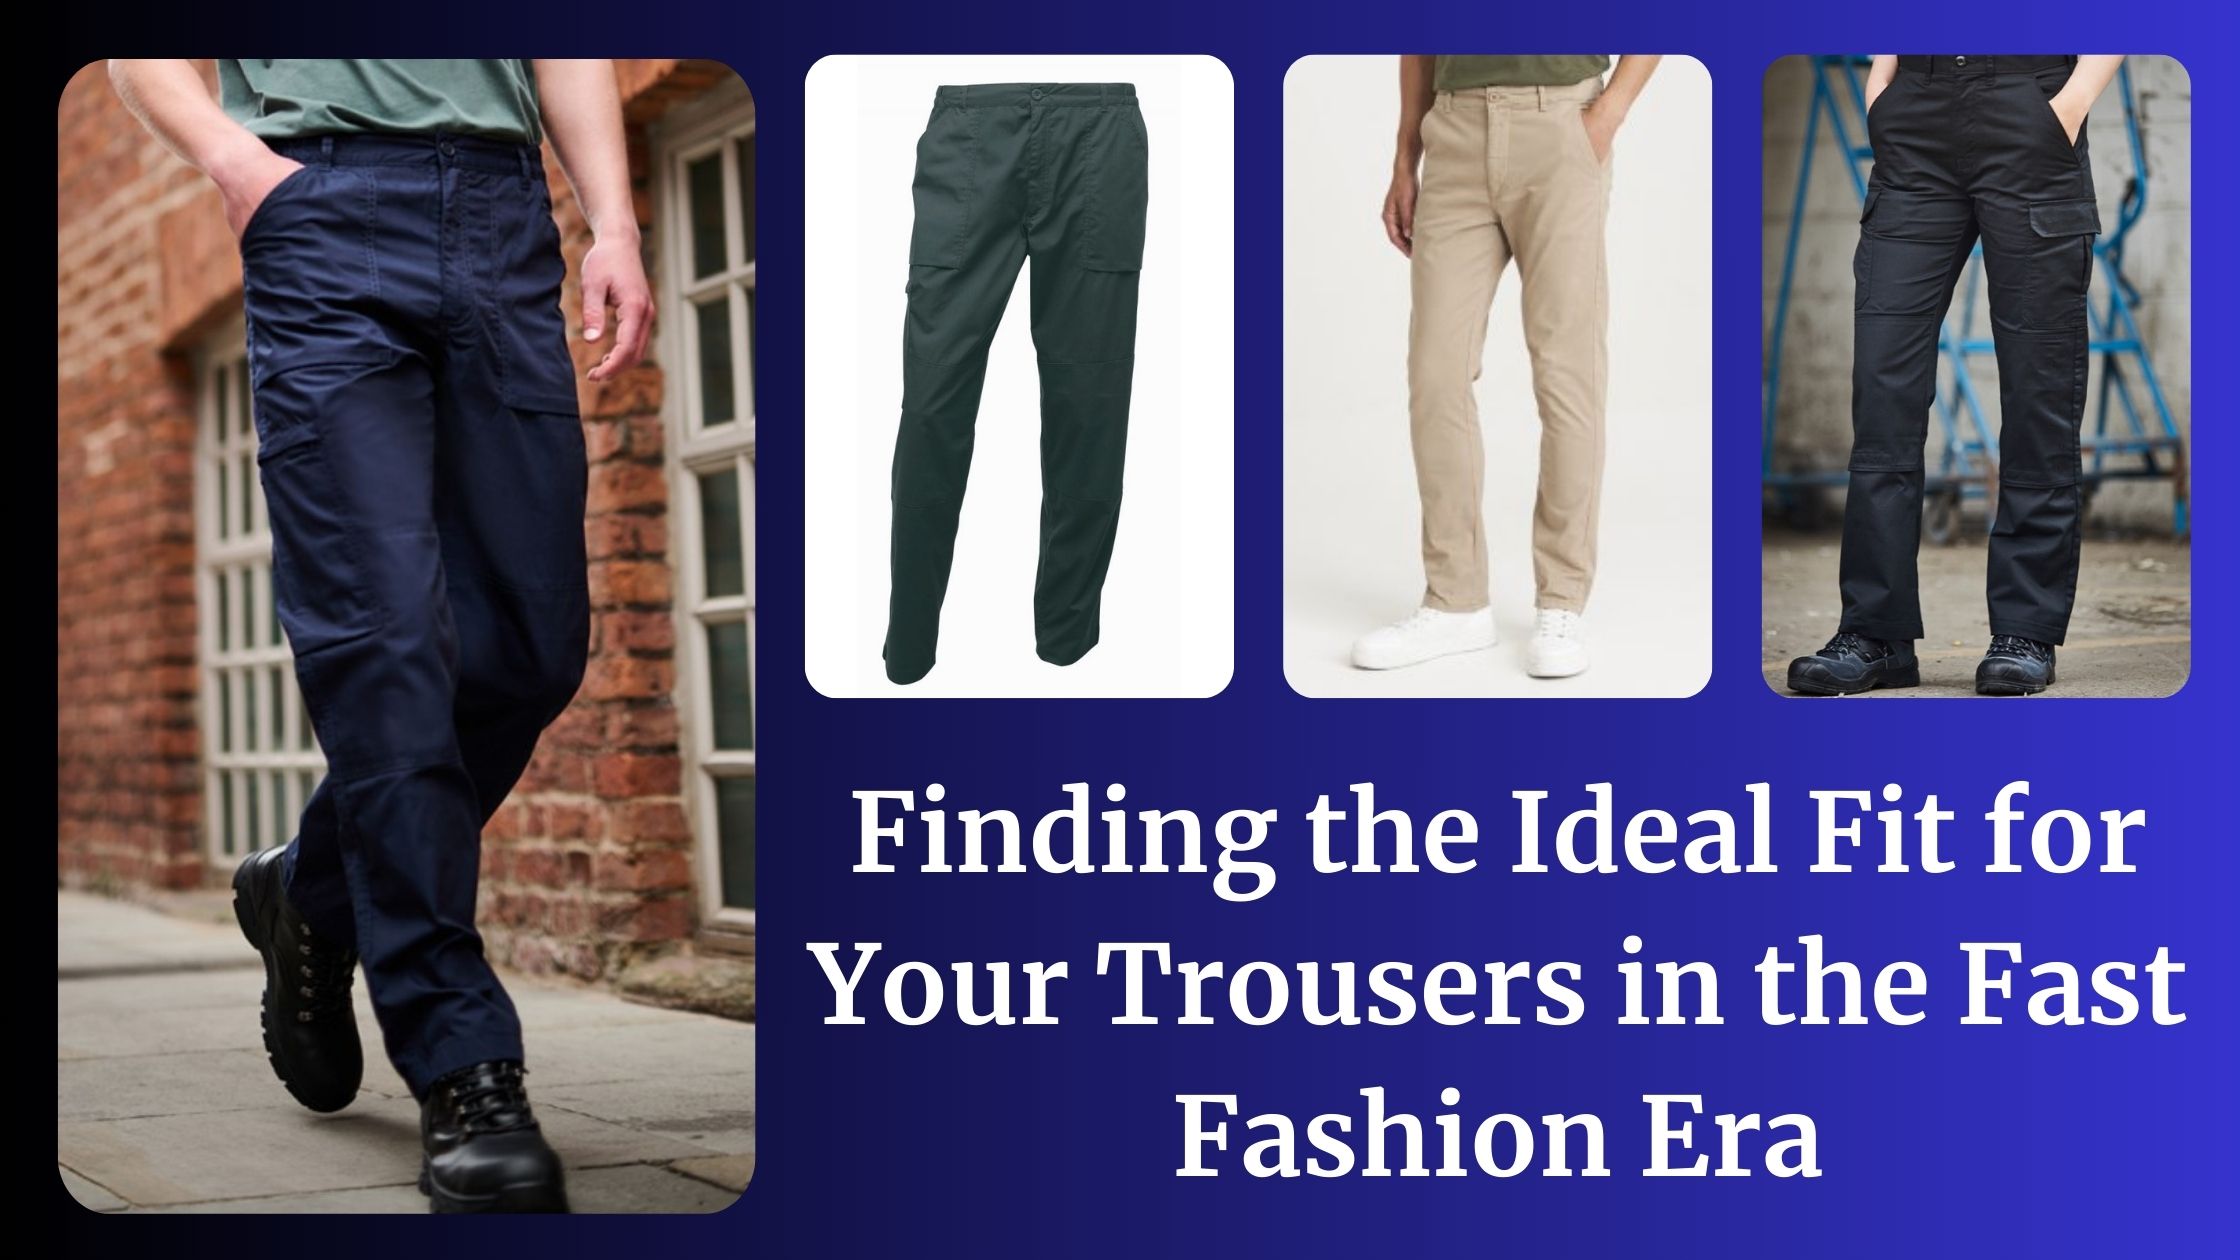 Finding the Ideal Fit for Your Trousers in the Fast Fashion Era -